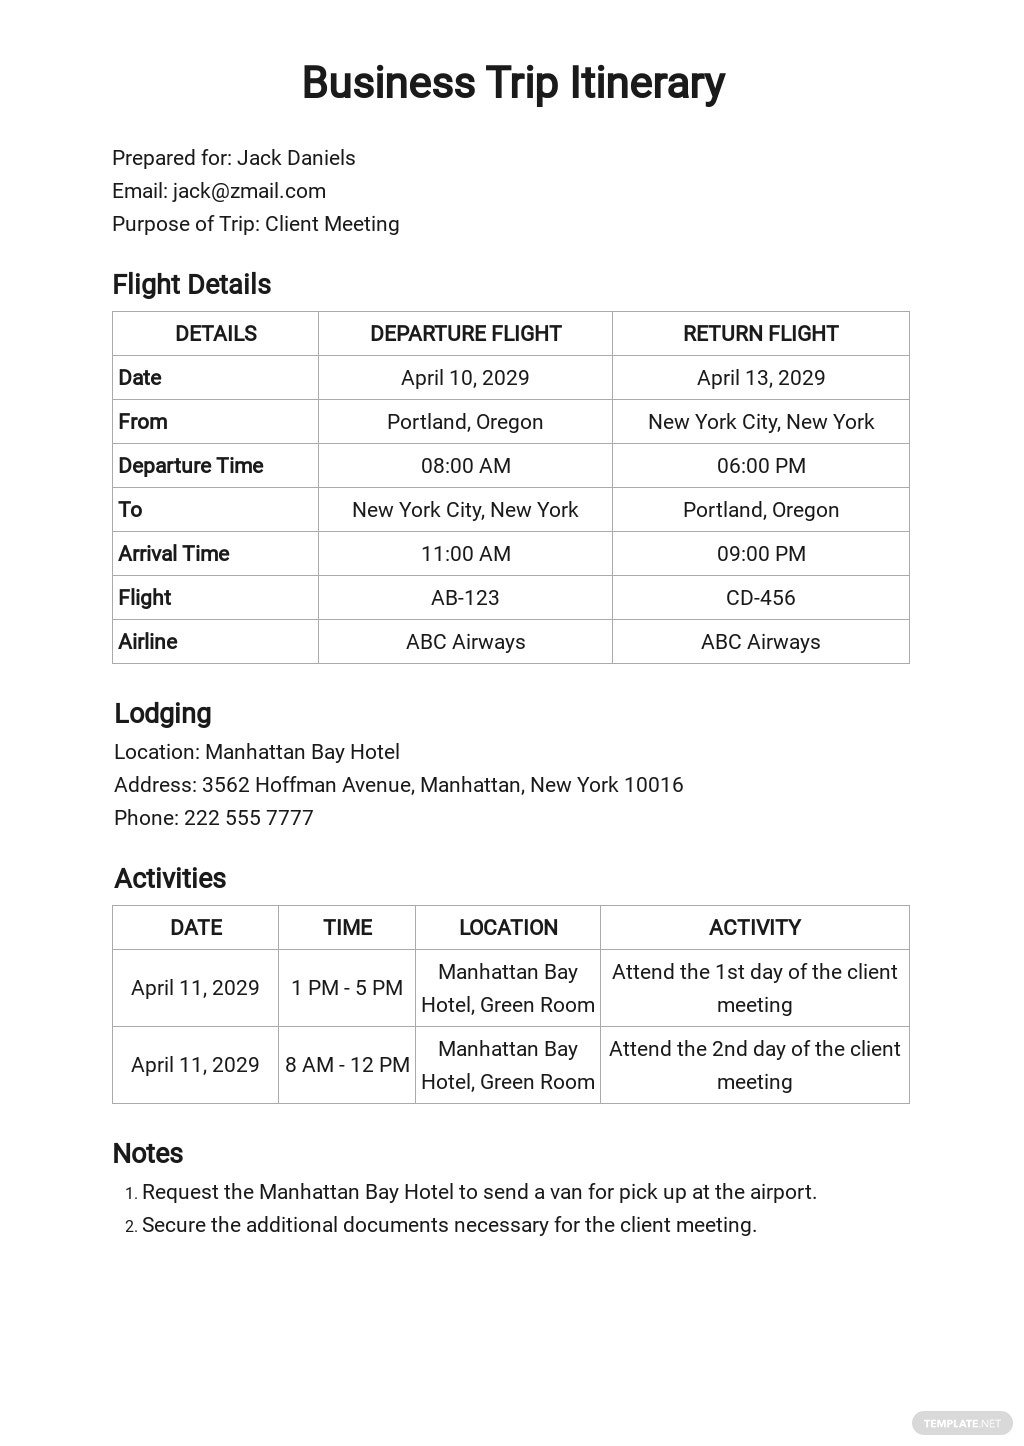 business-trip-itinerary-template